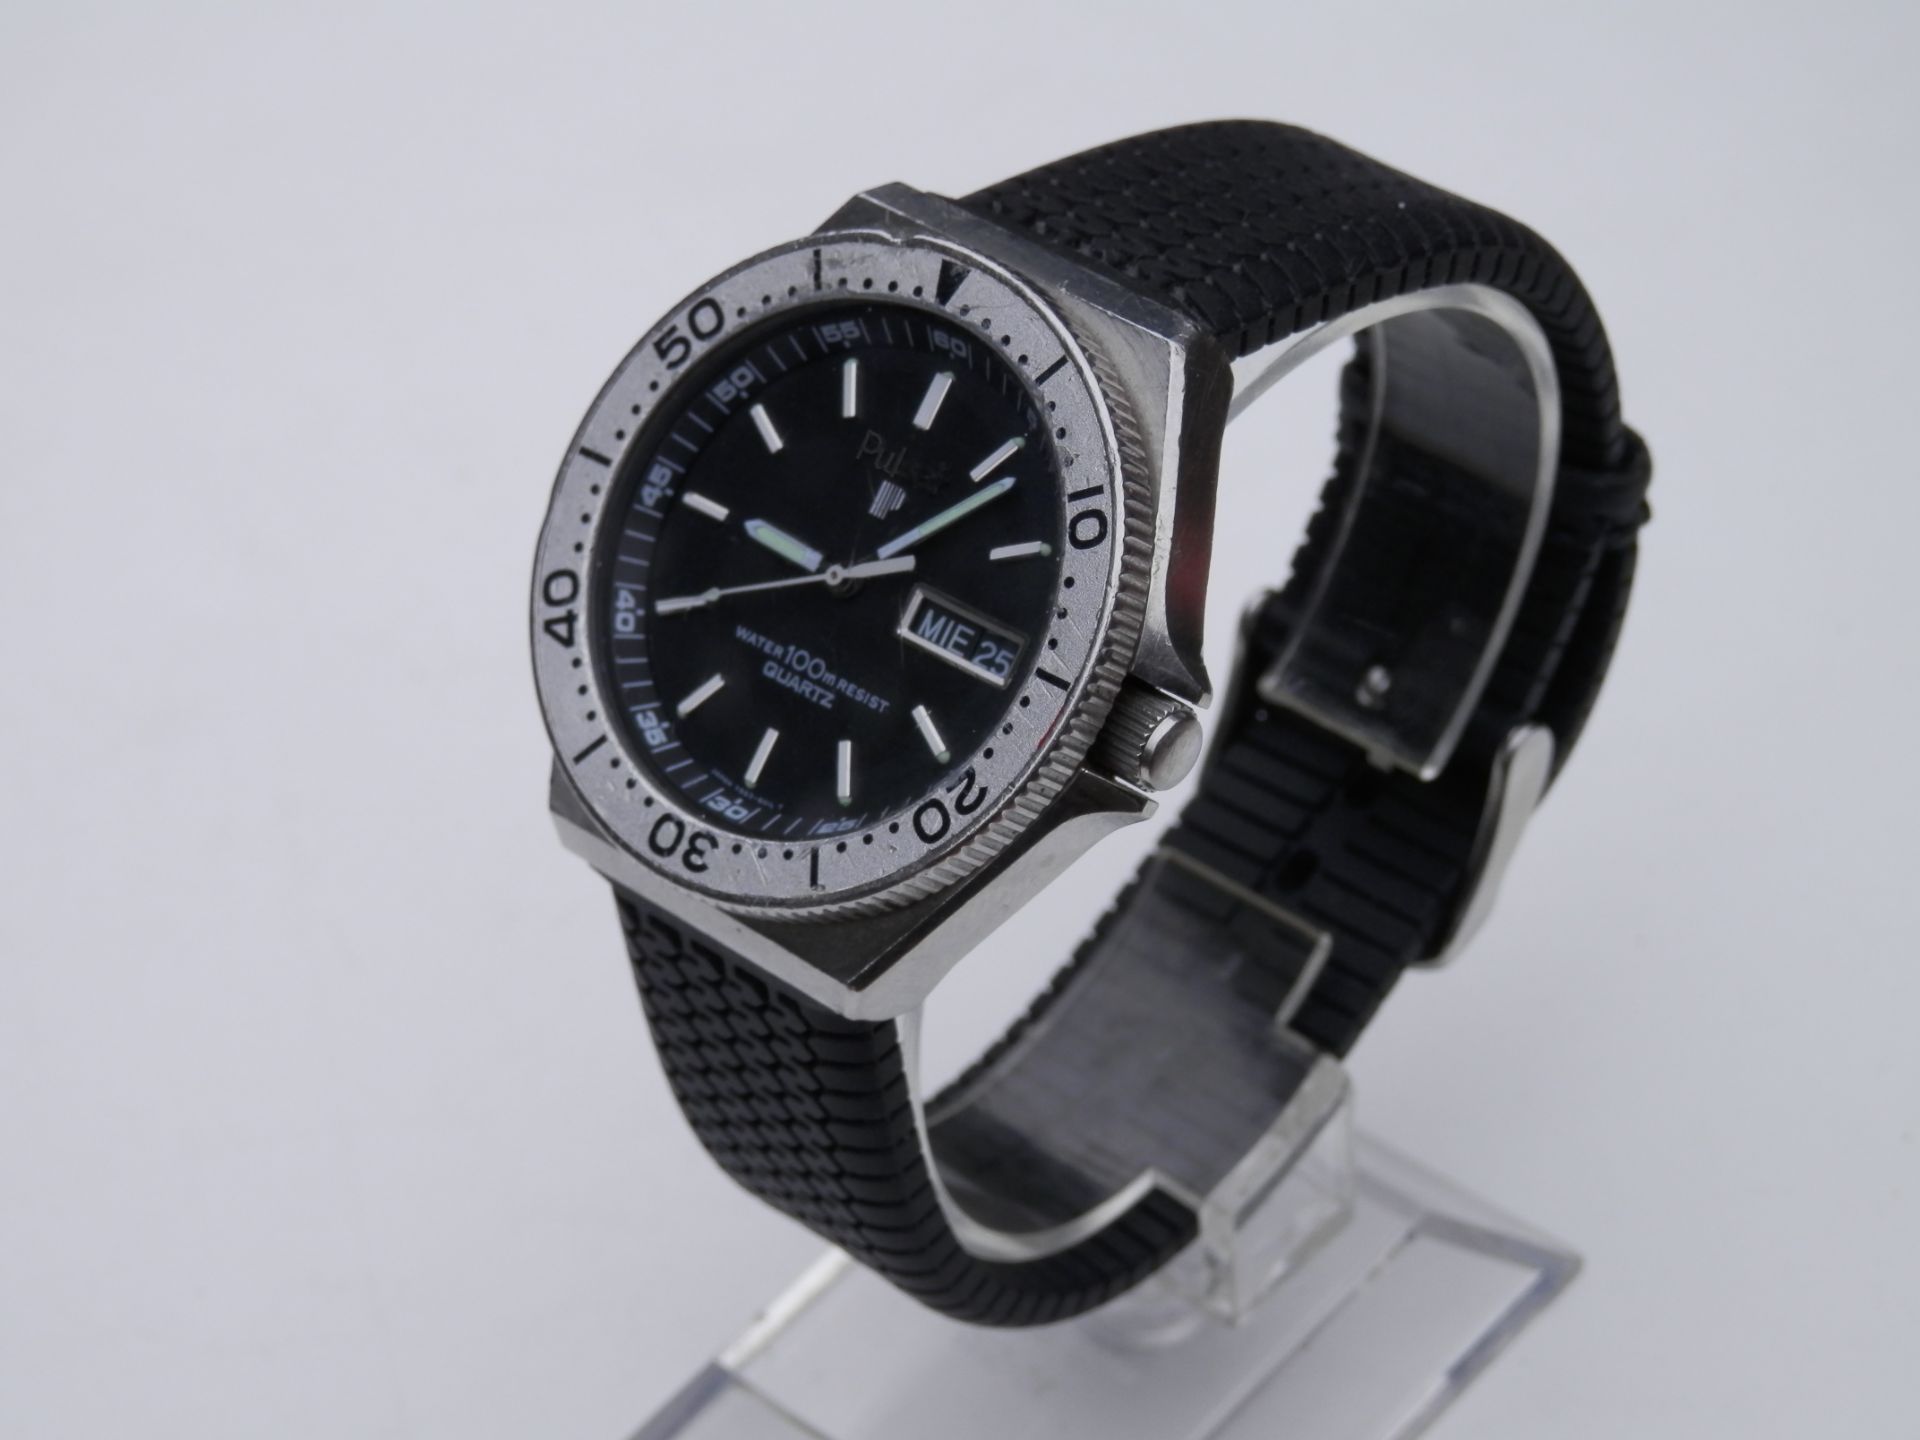 RARE GENTS 1980S PULSAR Y563 DIVERS STYLE 100M WATER RESISTANT QUARTZ DAY/DATE WATCH, WORKING.